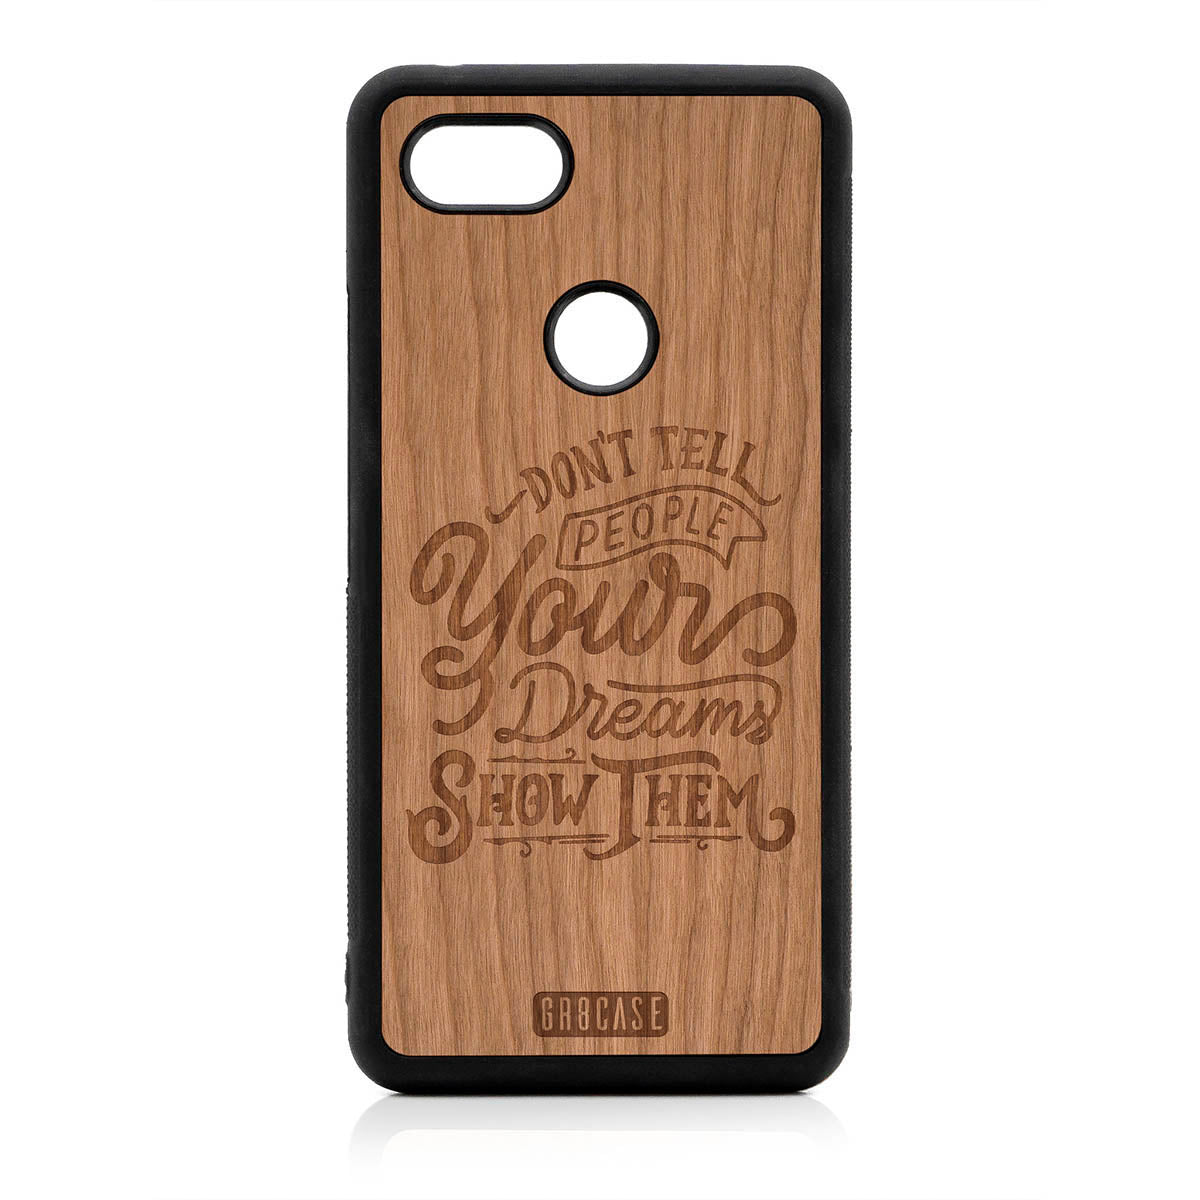 Don't Tell People Your Dreams Show Them Design Wood Case For Google Pixel 3 XL by GR8CASE